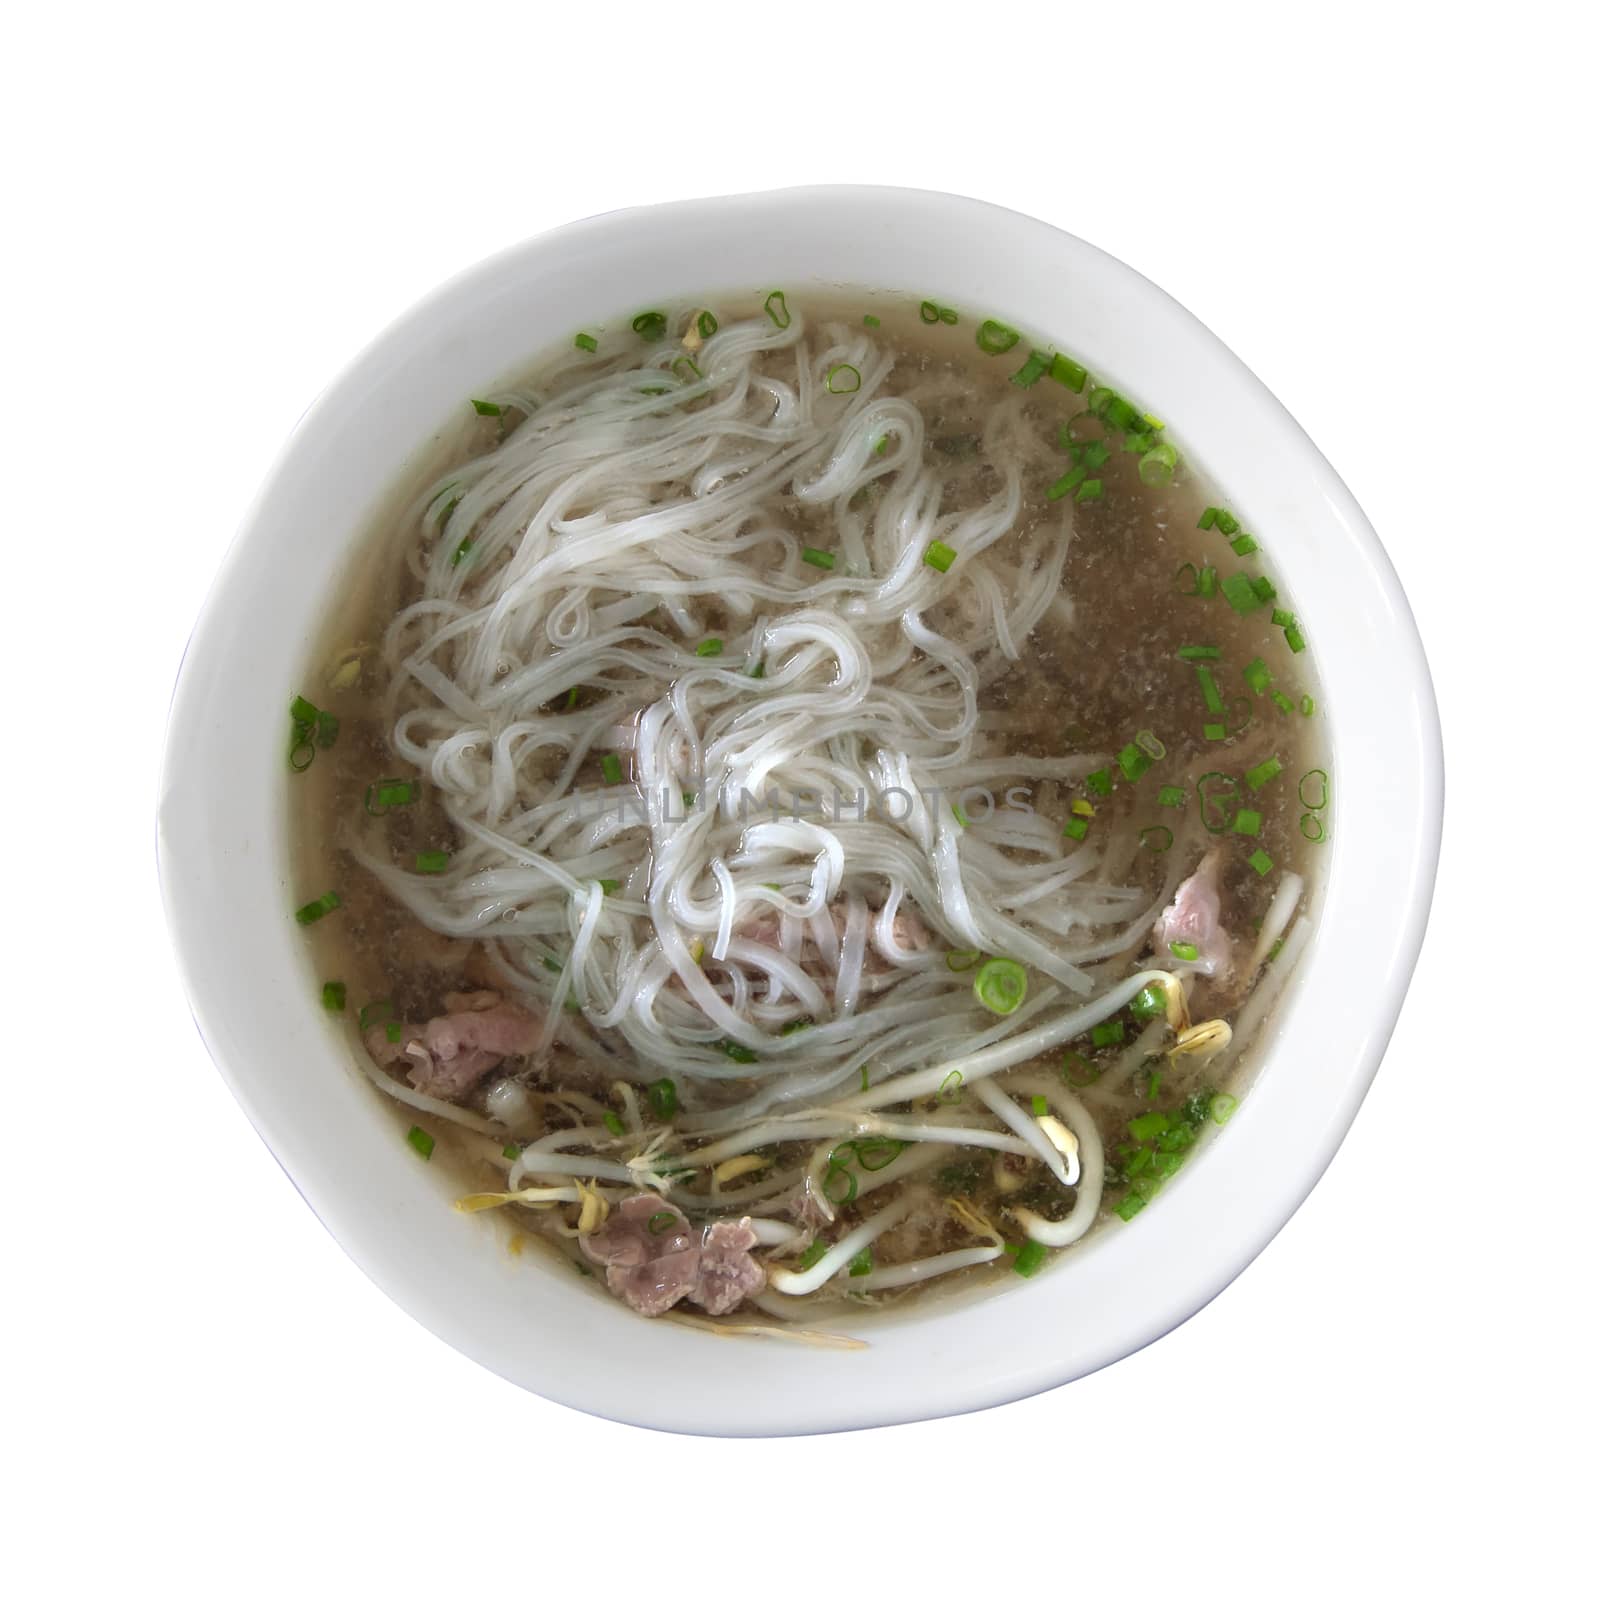 Traditional vietnamese soup pho bo by Goodday